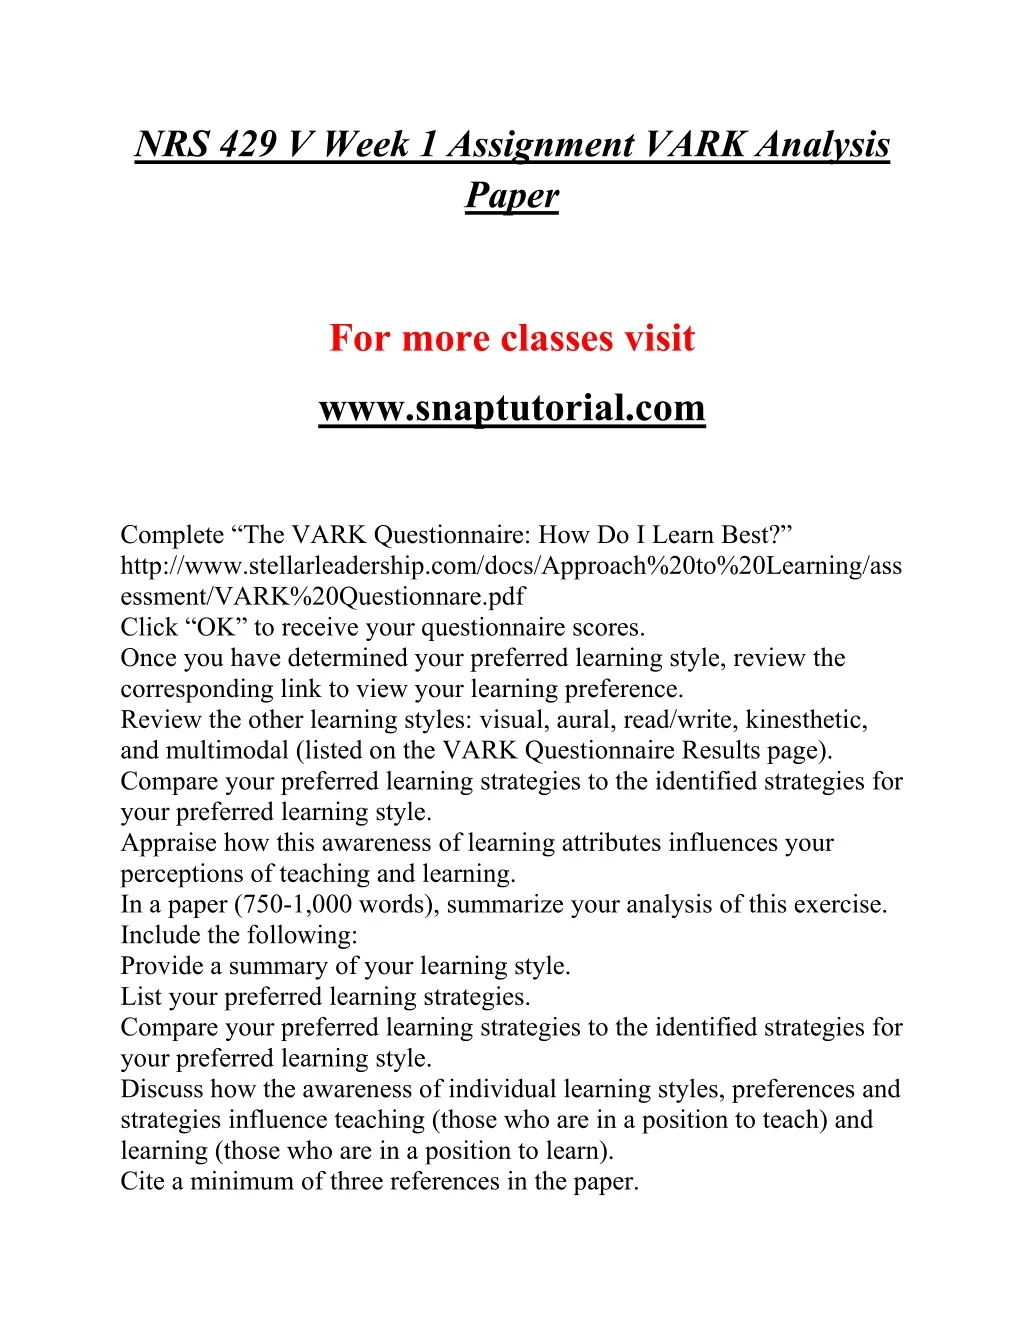 nrs 429 v week 1 assignment vark analysis paper